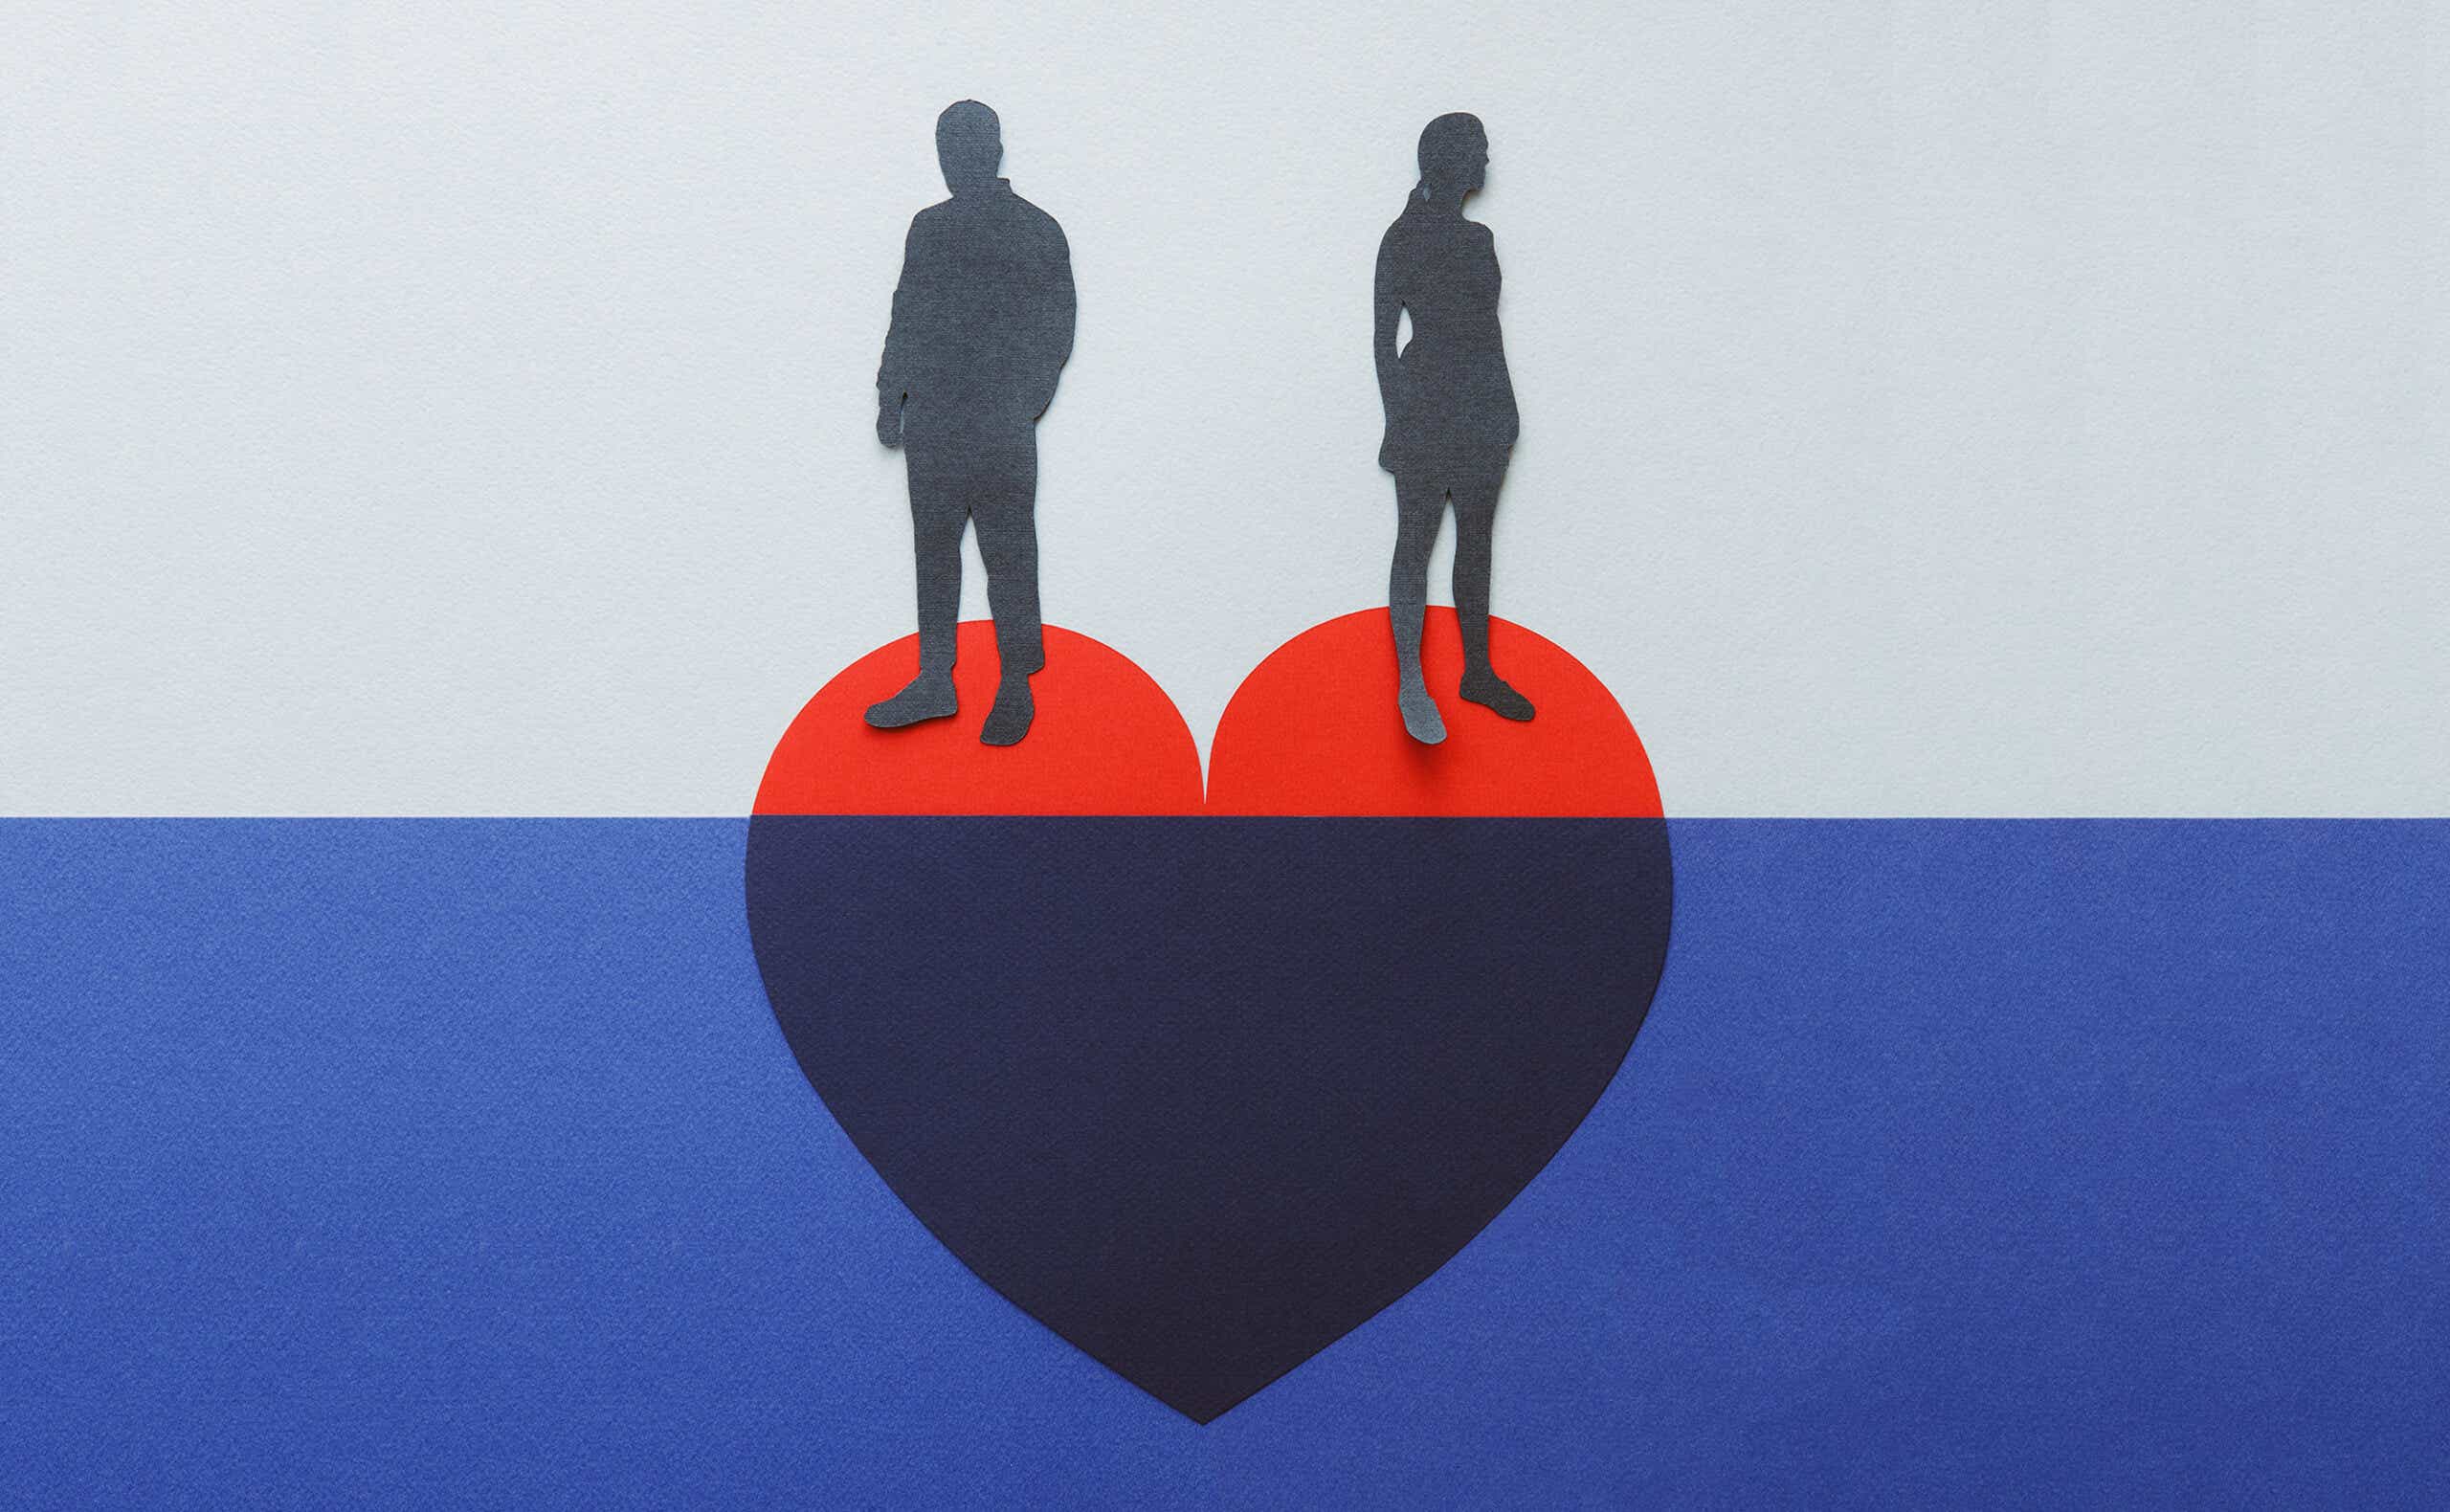 A couple stands on either side of a red heart suspended in blue water.